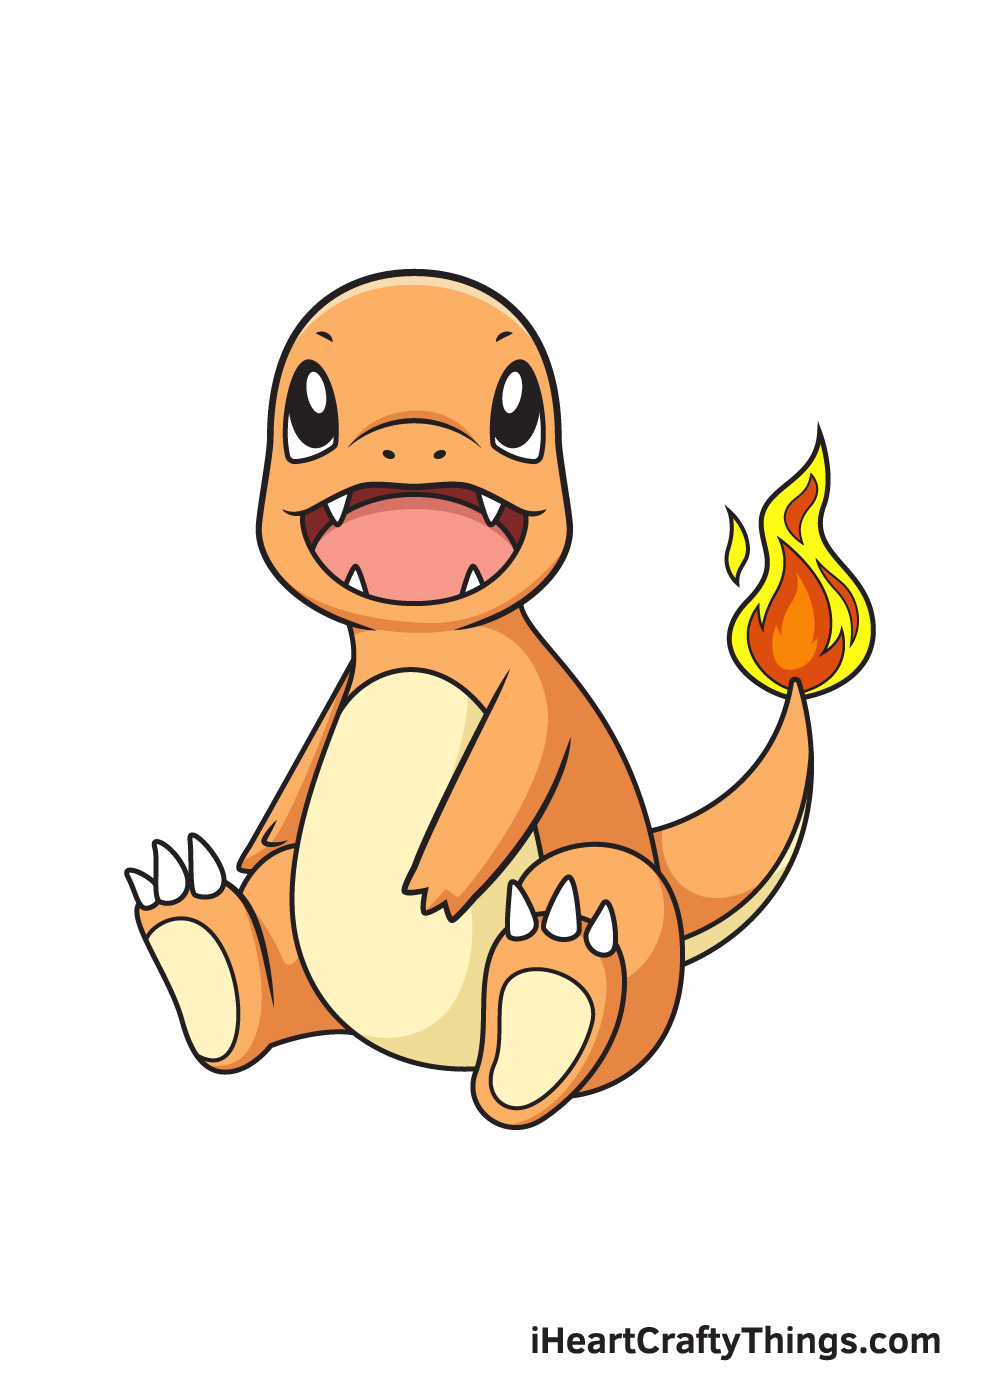 Top 999+ charmander images – Amazing Collection charmander images Full 4K